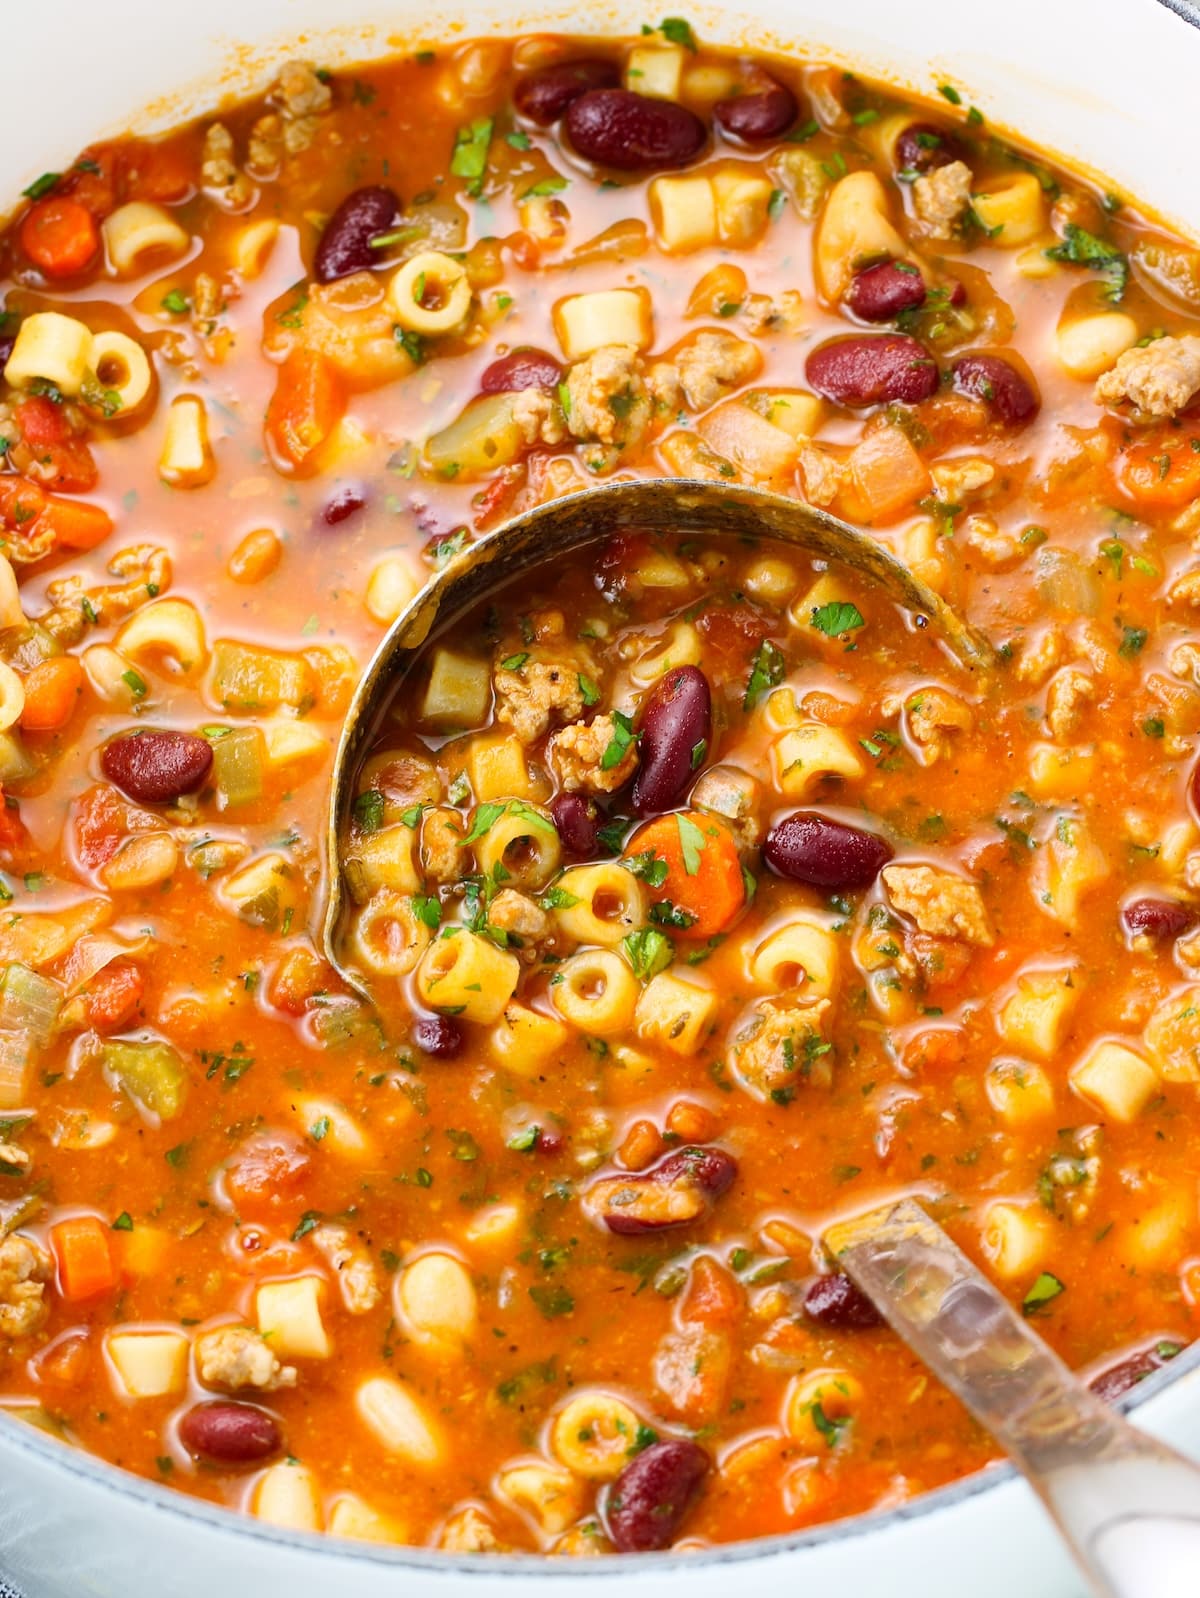 A Dutch oven of Italian soup with Pasta and Beans.